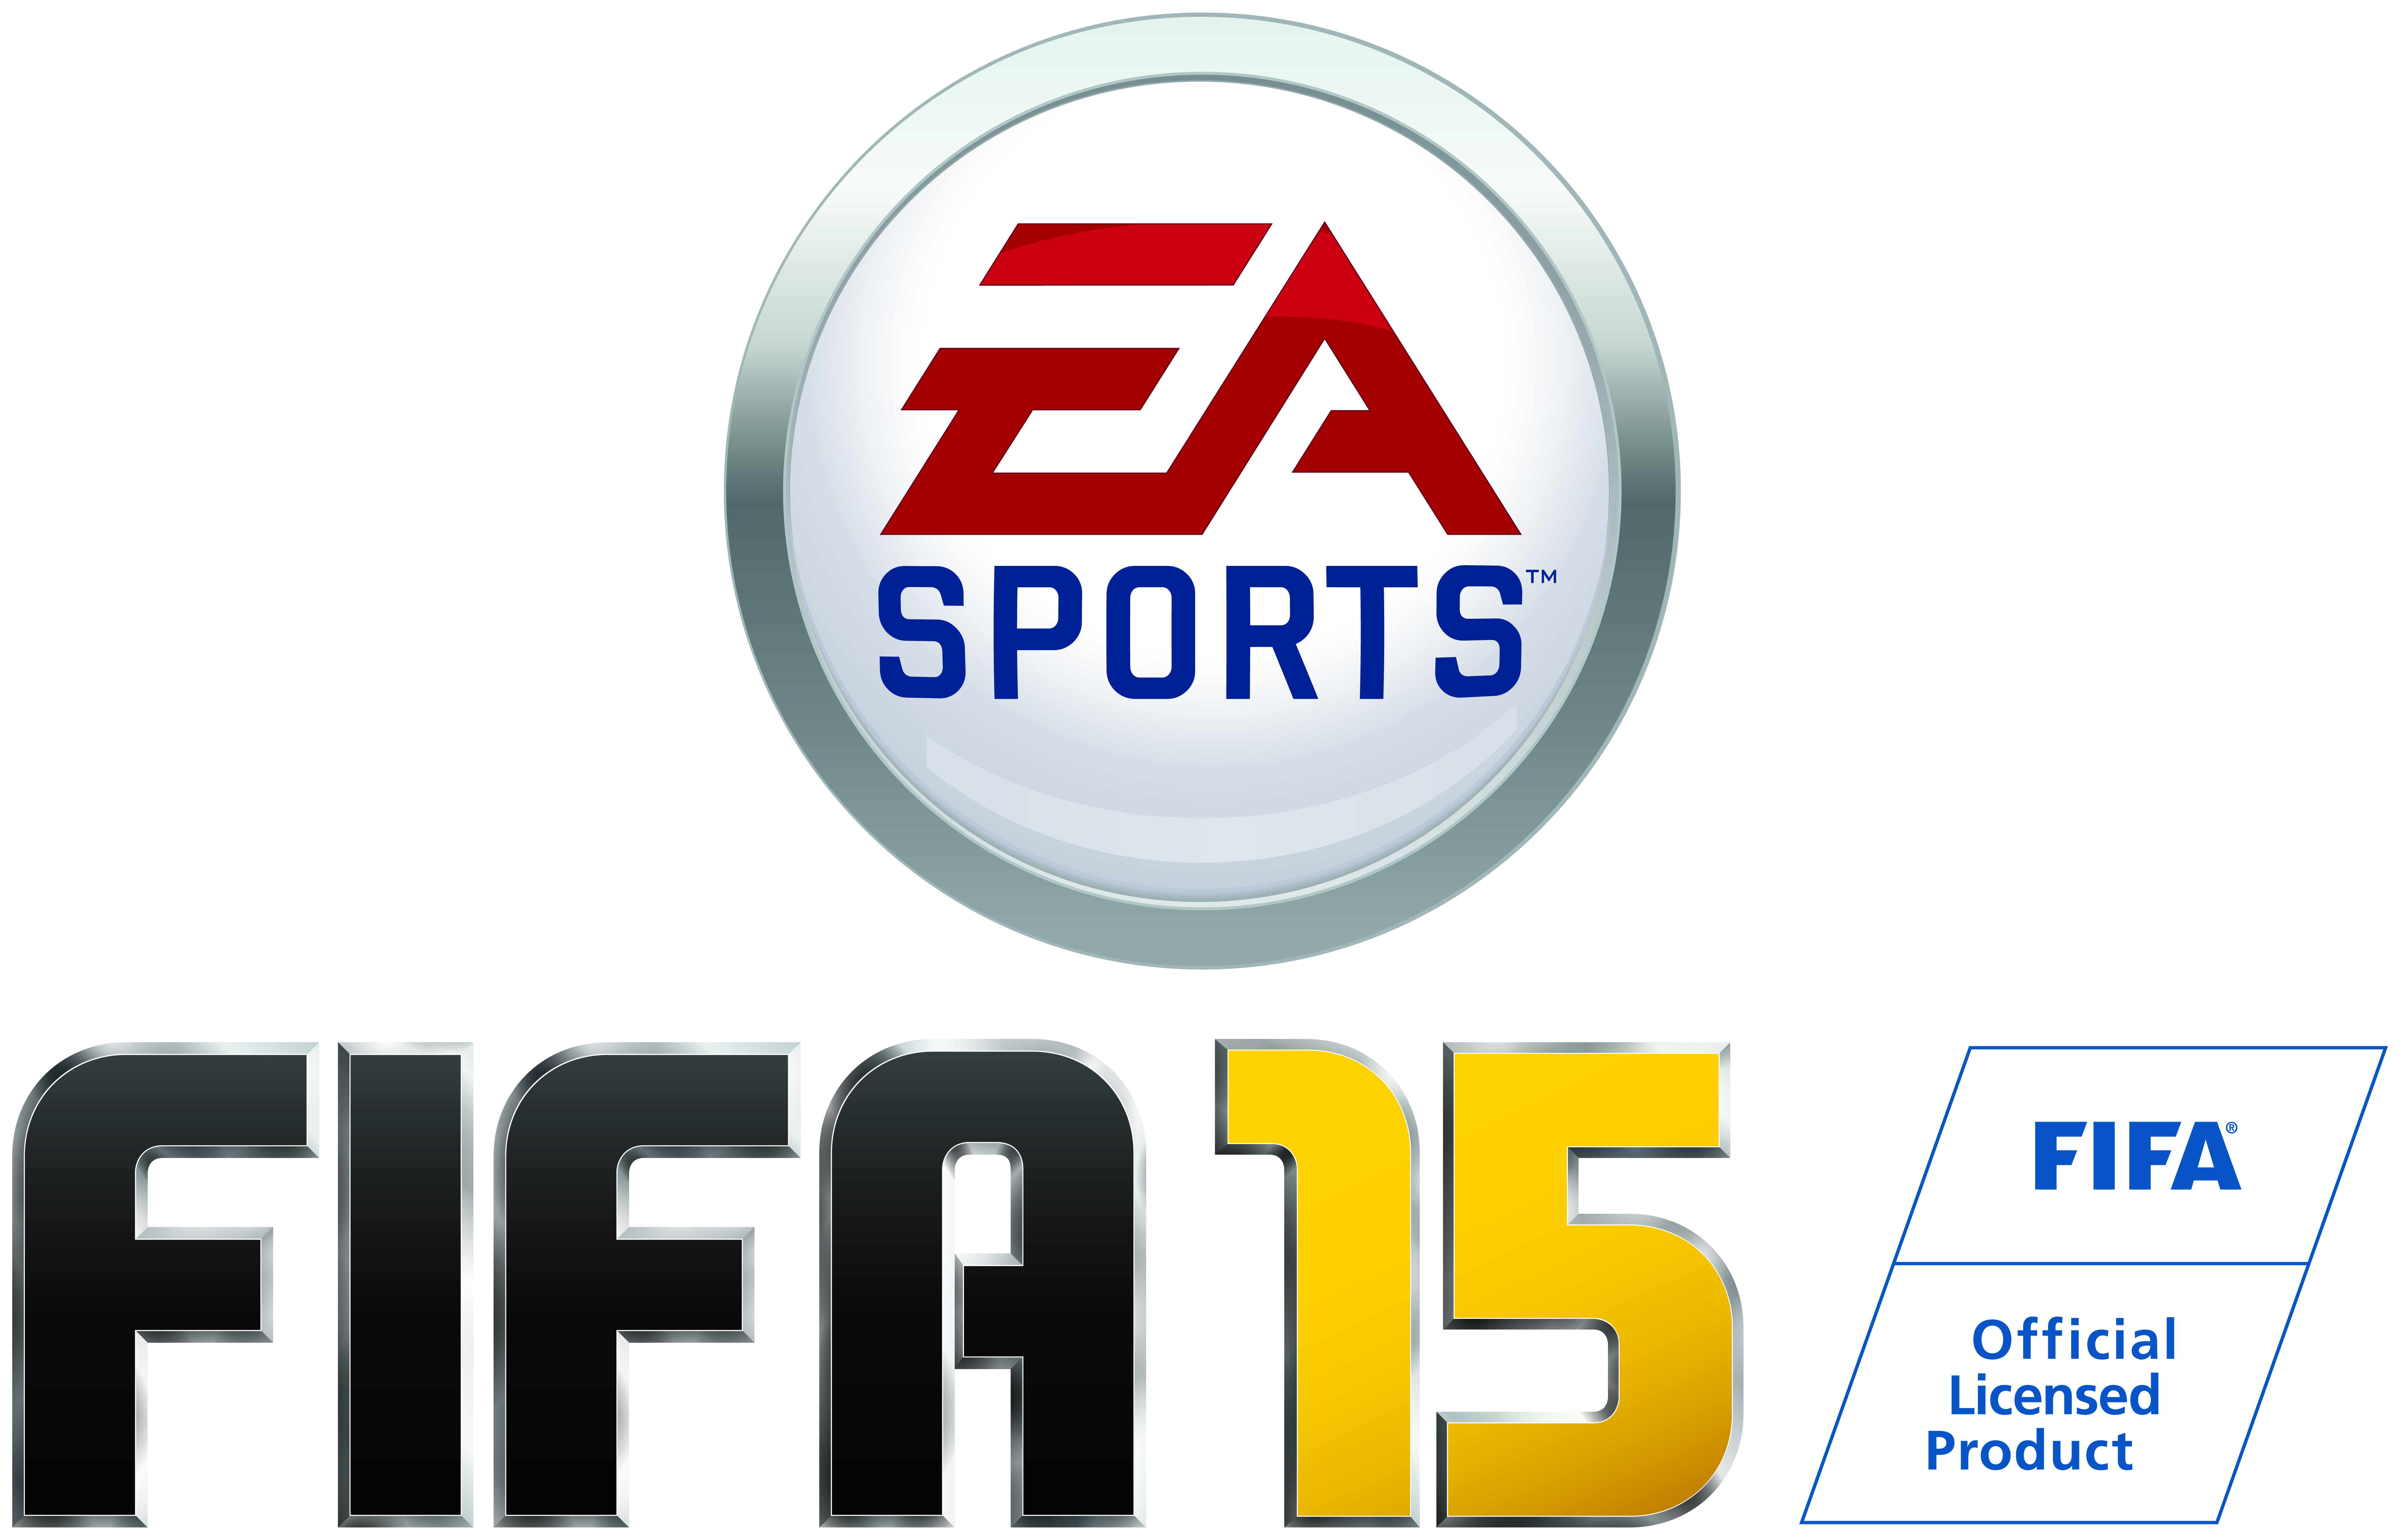 fifa 15 ultimate team free coins